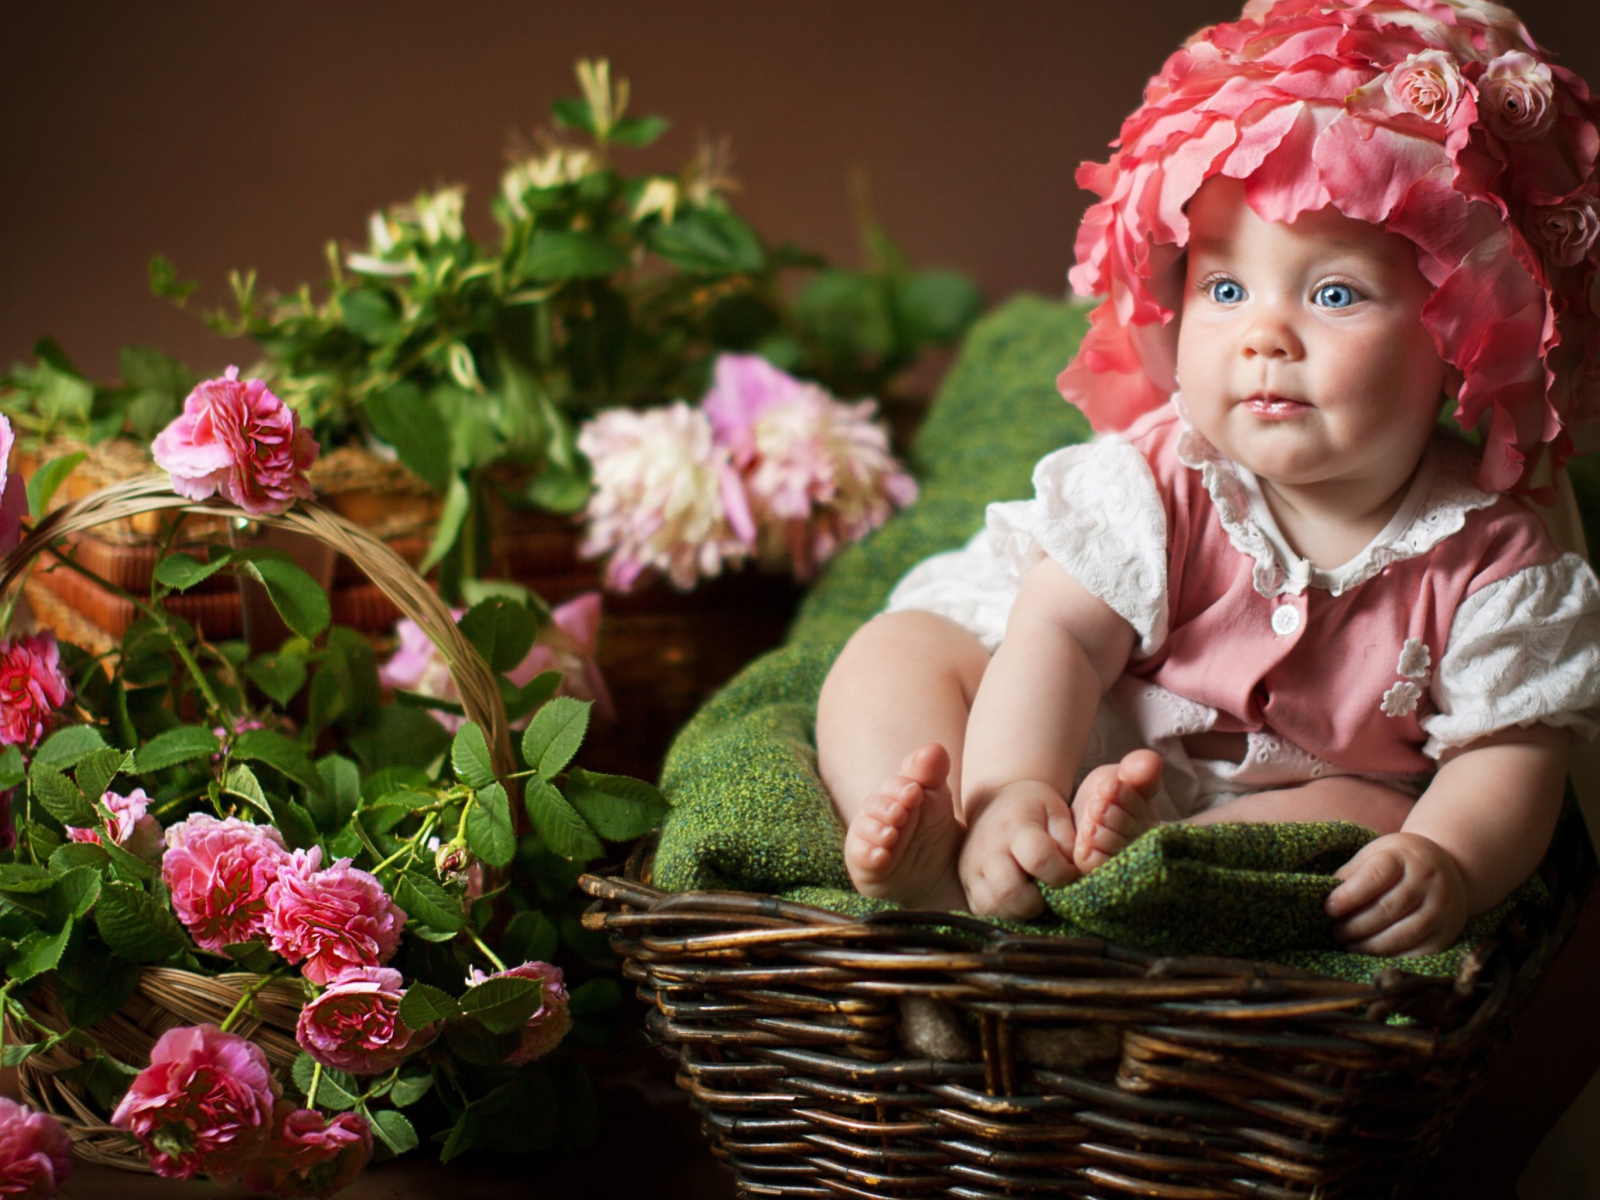 Cute Baby With Blue Eyes And Roses wallpaper 1600x1200